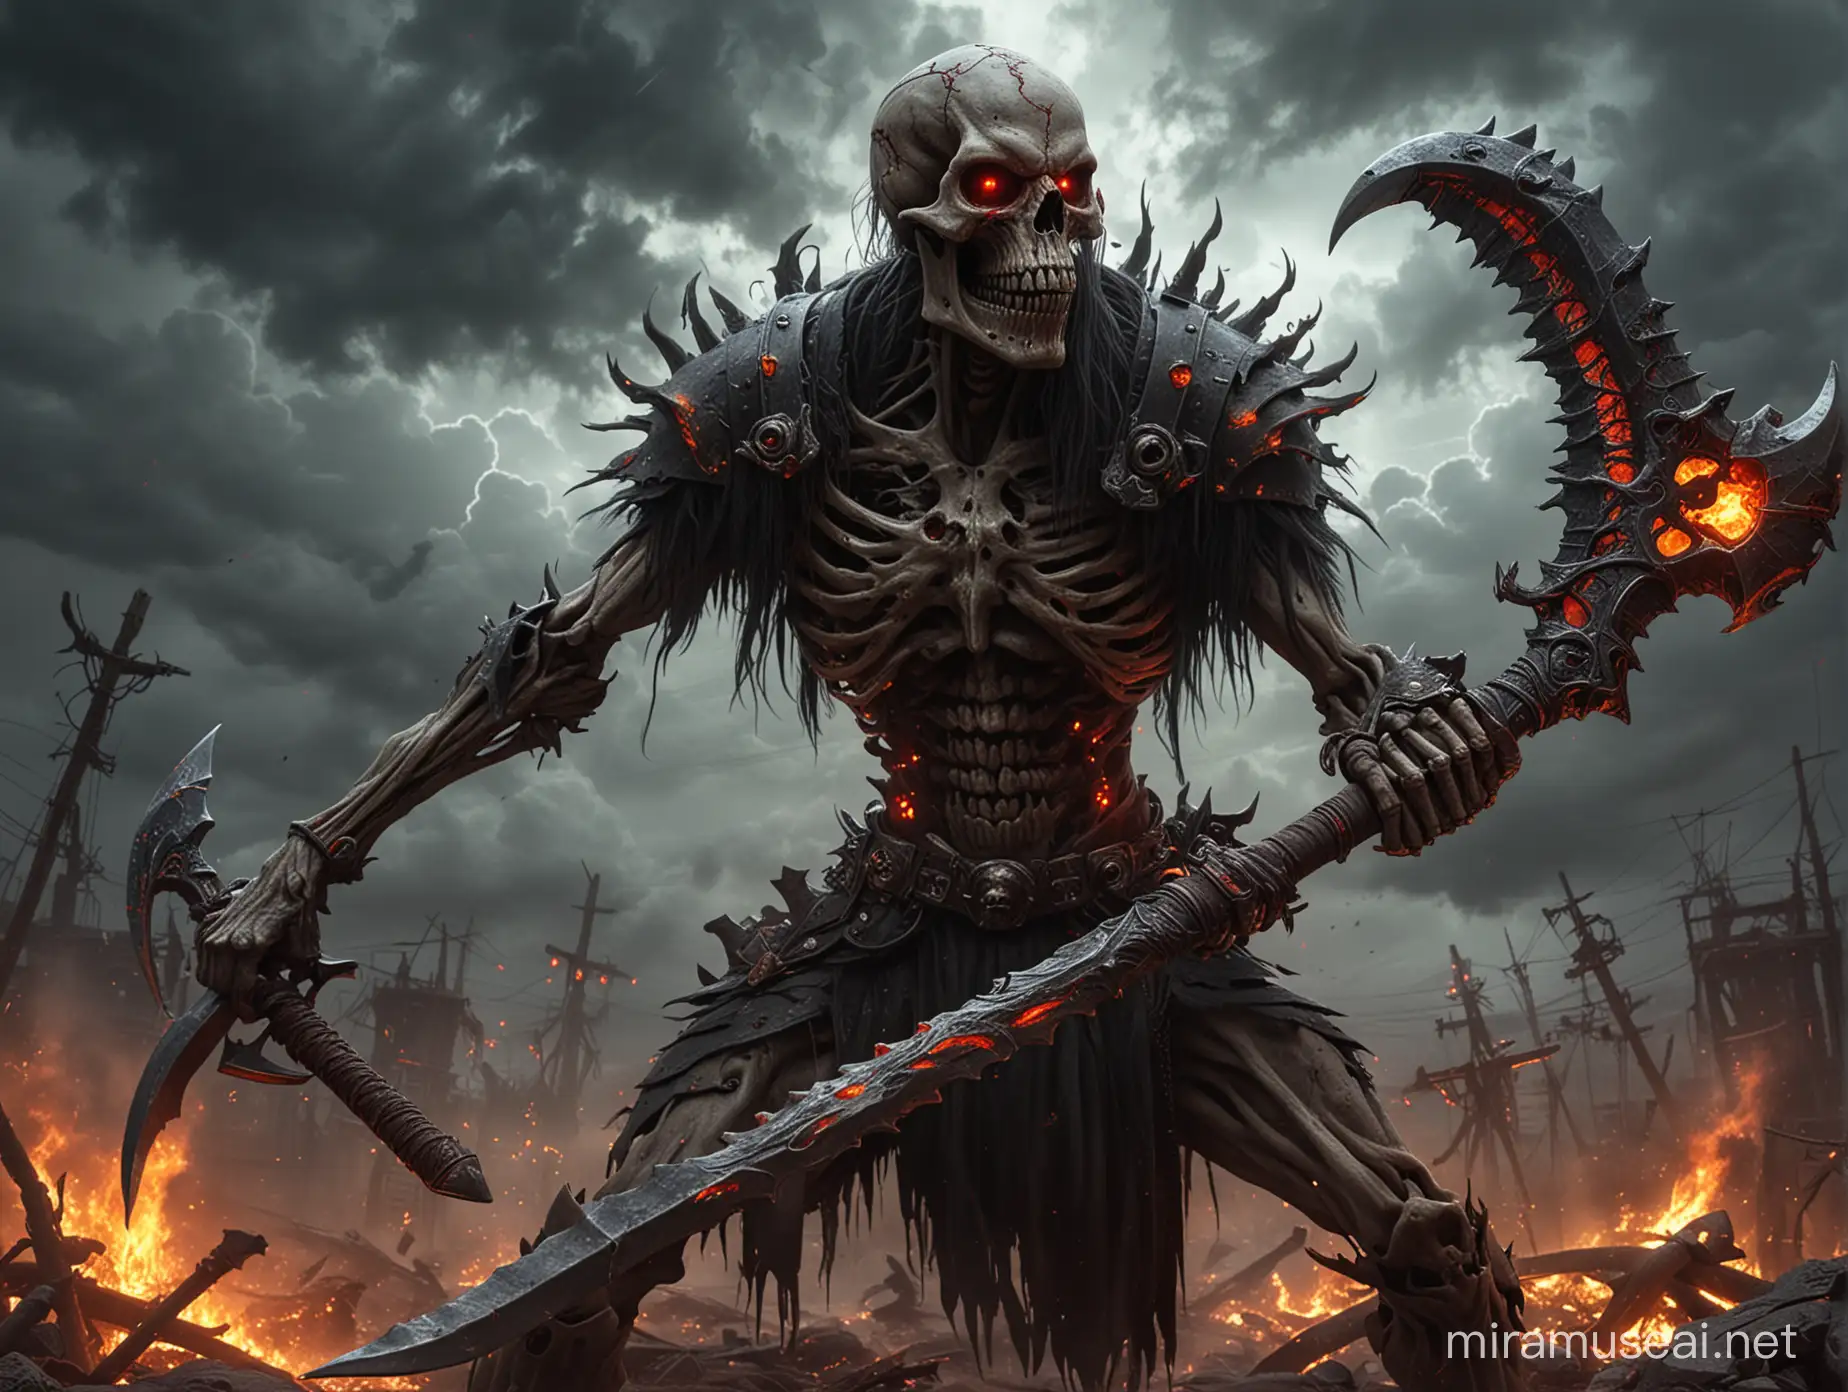 Skeletal Abomination Wielding Double Blade Axe in Ominous Apocalyptic Storm